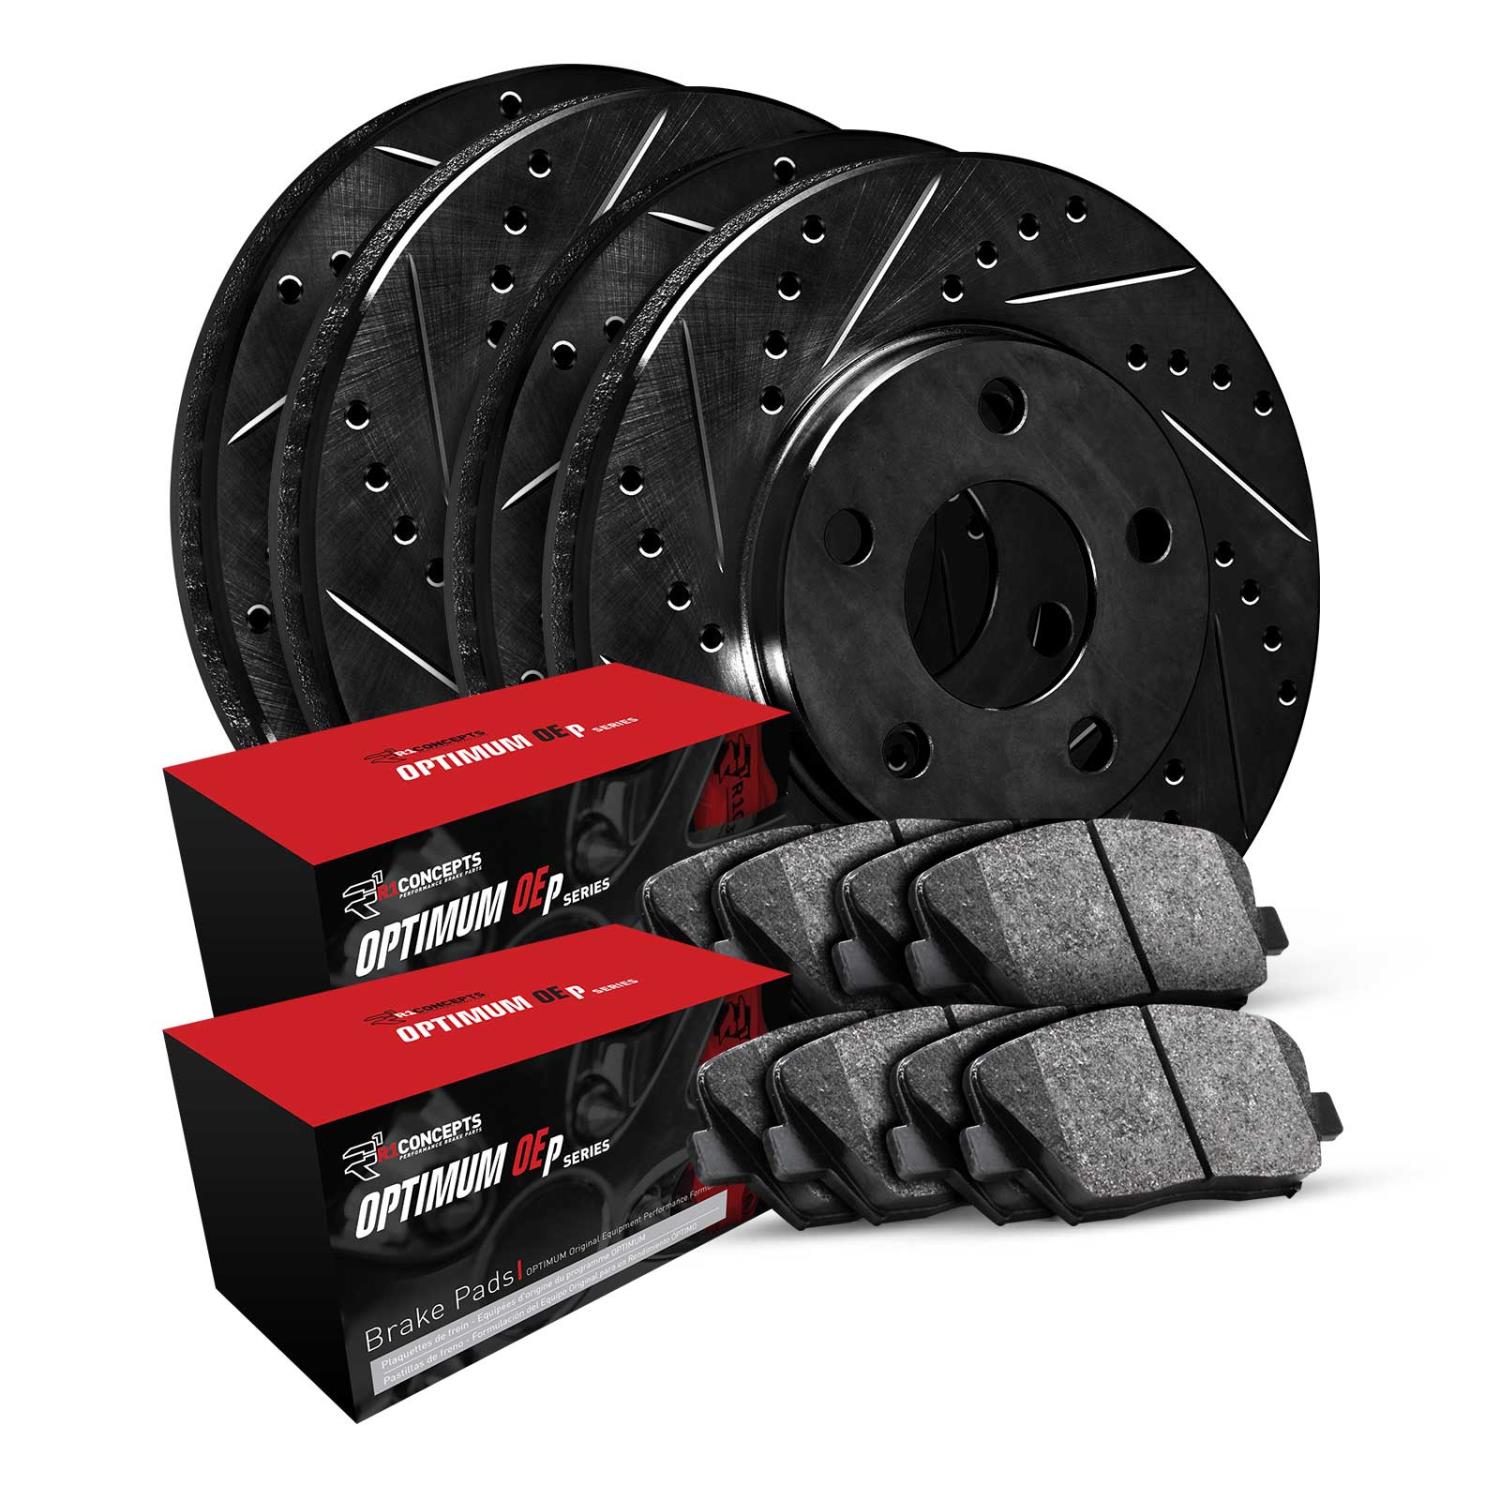 E-Line Drilled & Slotted Black Brake Rotor Set w/Optimum OE Pads, Fits Select Fits Multiple Makes/Models, Position: Front & Rear